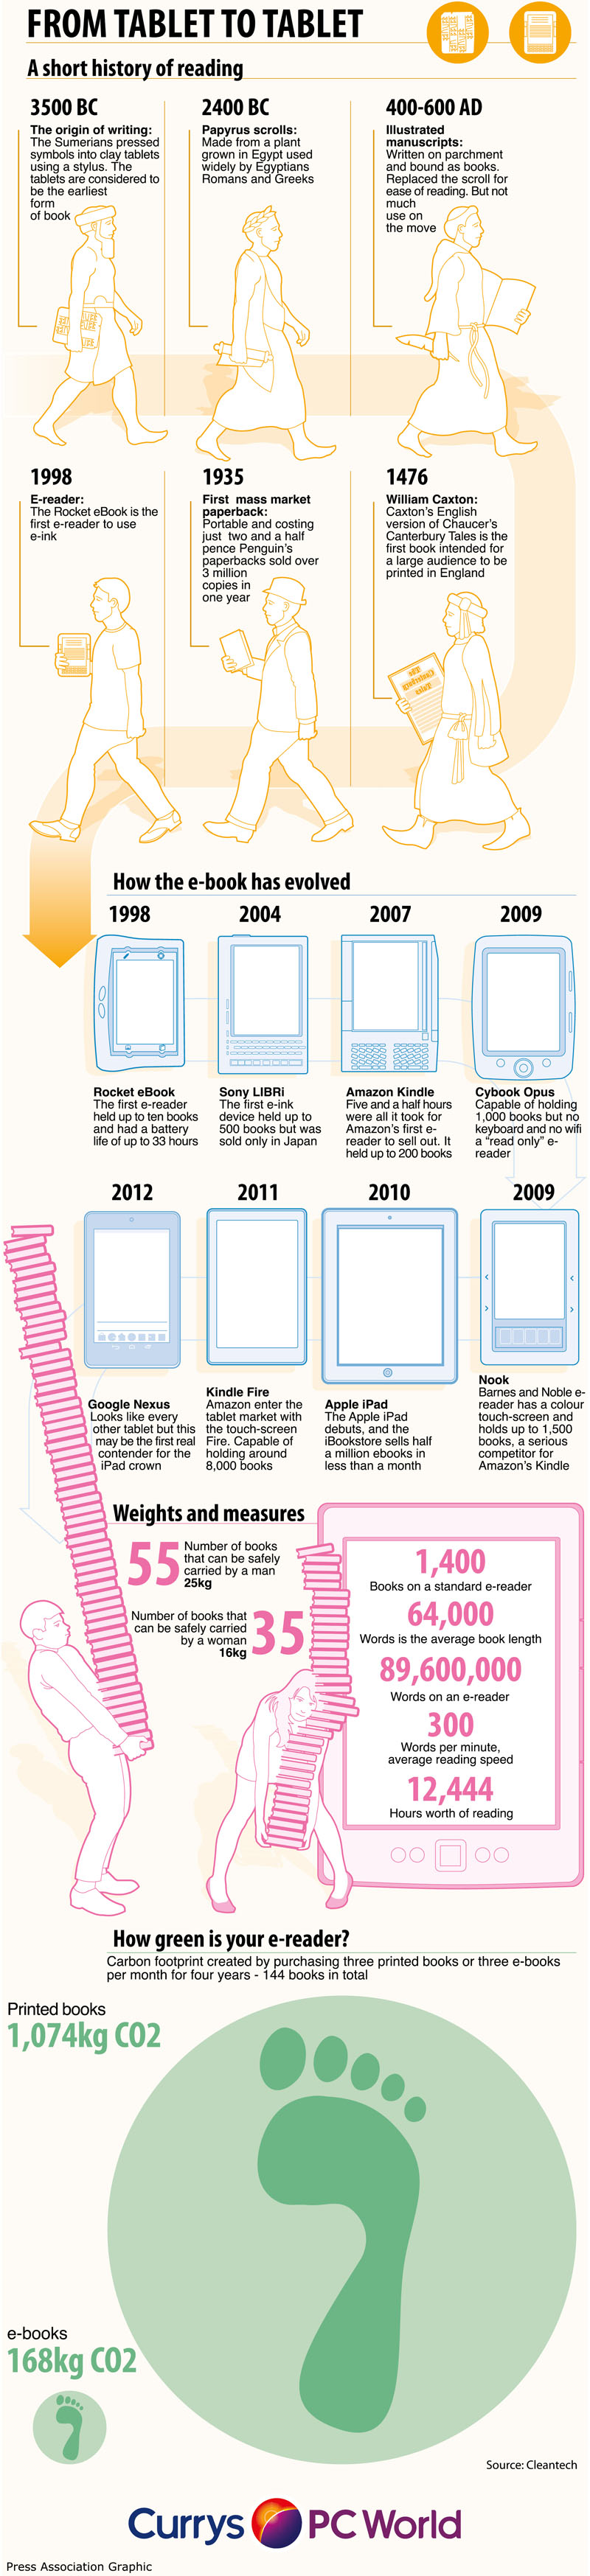 From tablet to tablet - a fun look at the history of reading - infographic